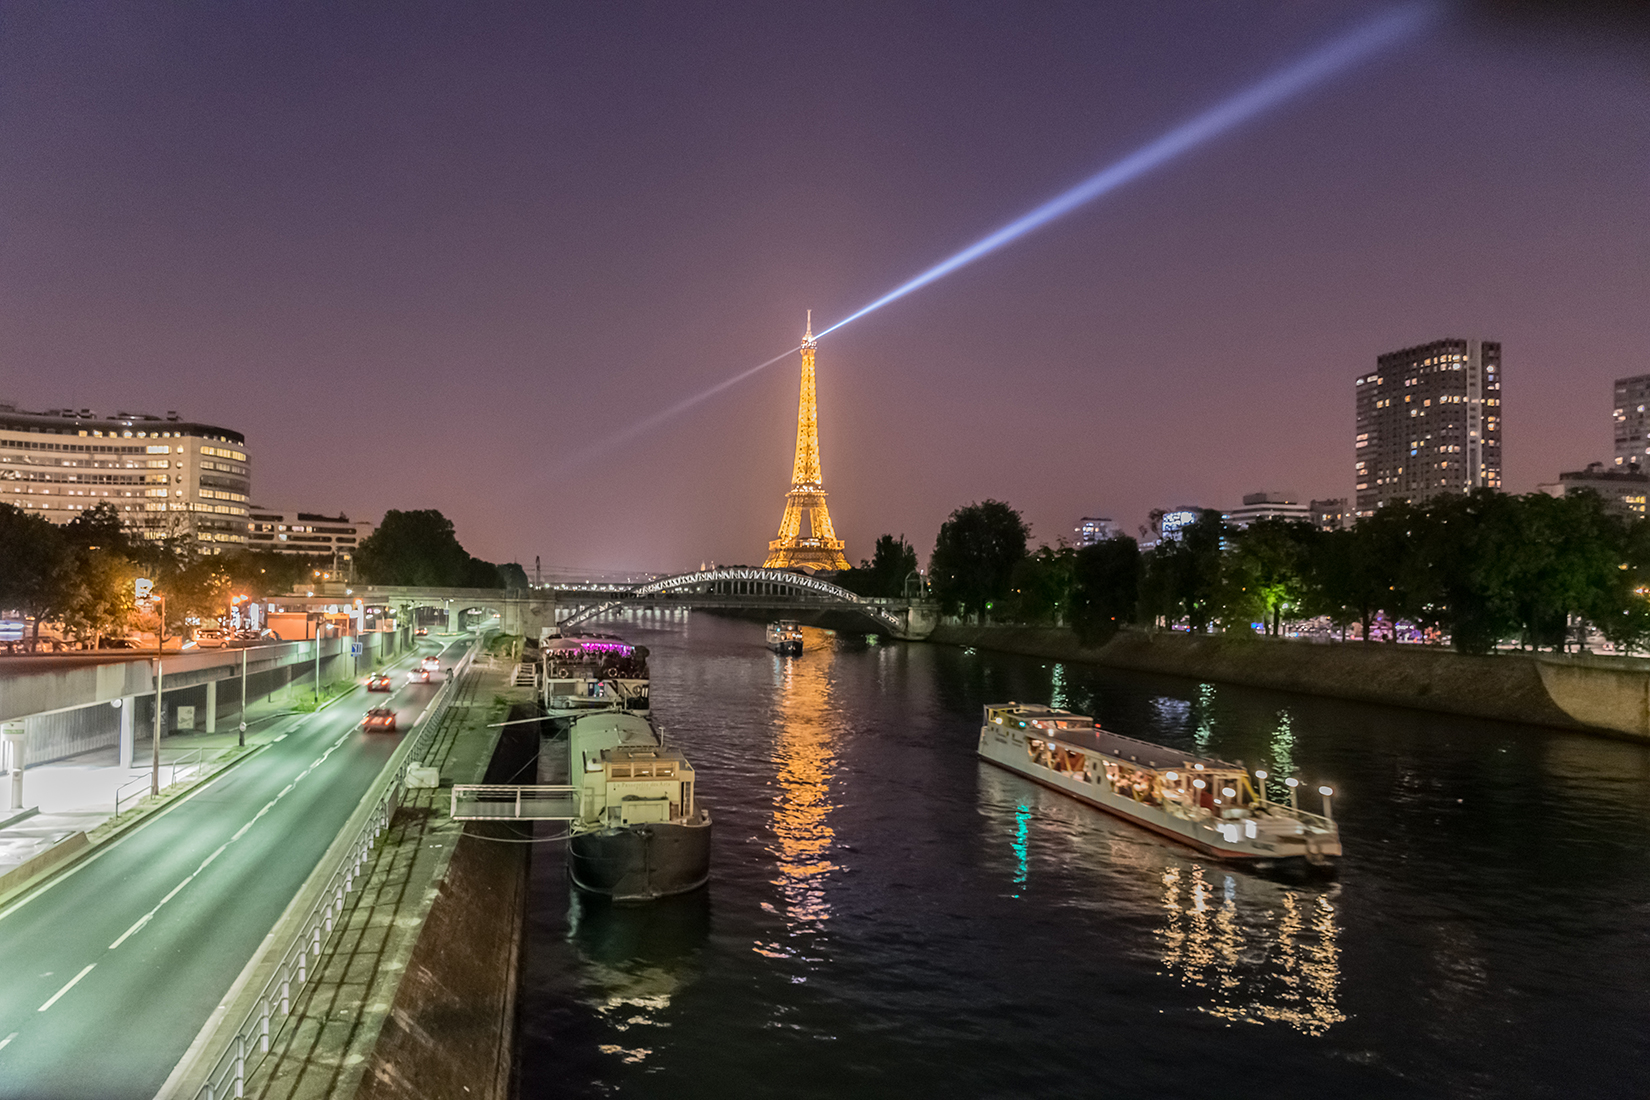 The Eiffel Tower illuminated at night. Here seen from the Pont du Garigliano bridge over the Seine in the west of the city